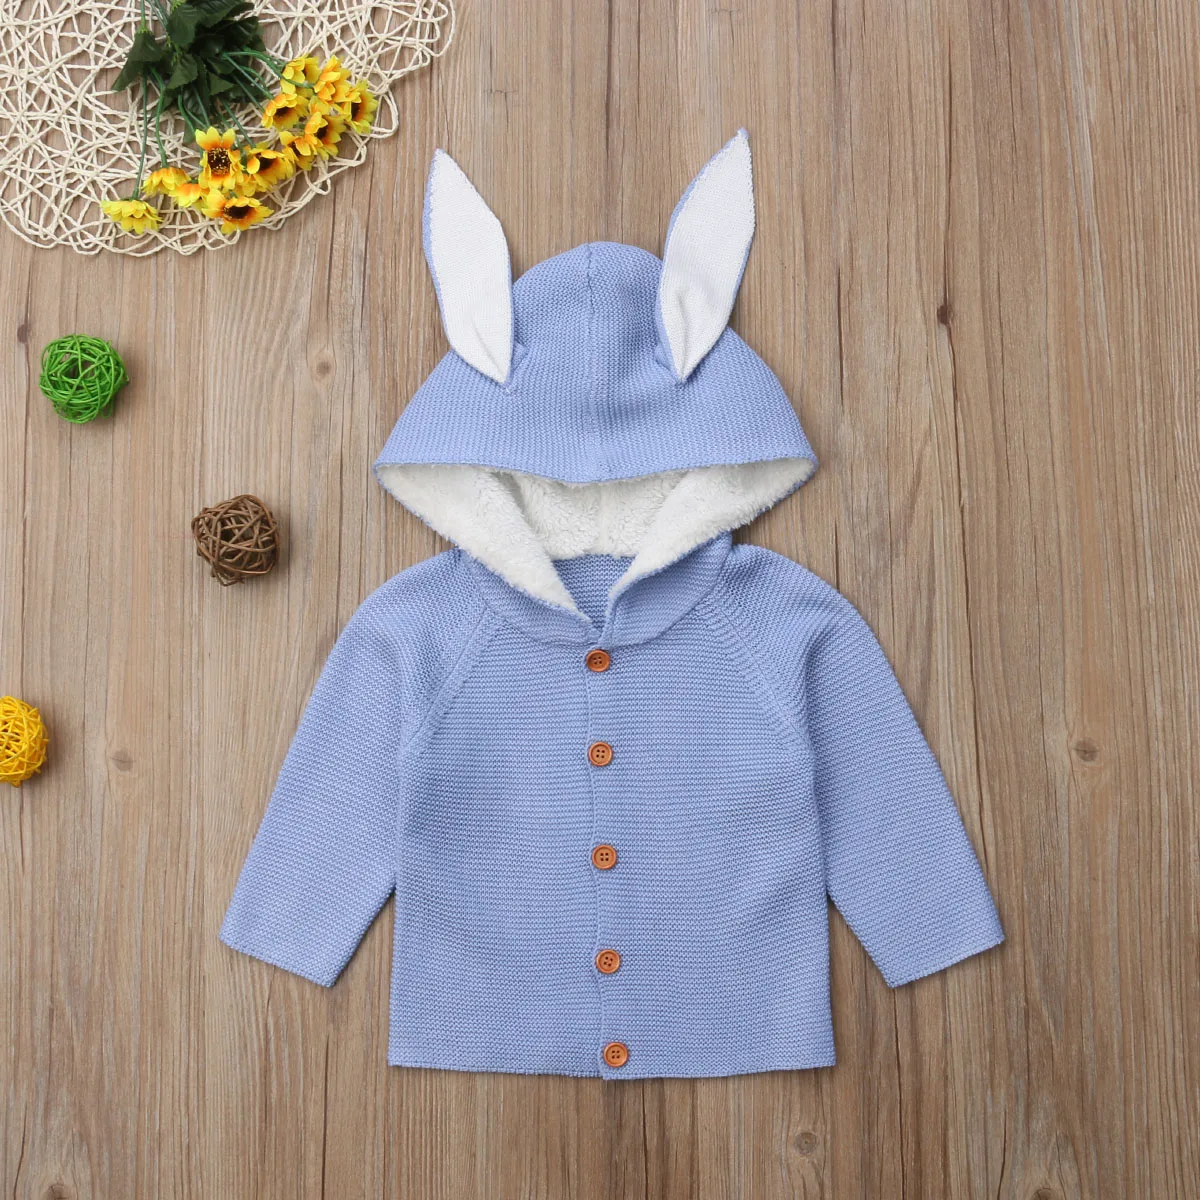 Baby Girl Newborn Winter Clothes Knitted Sweater Cute Easter Ear Hooded Cardigan